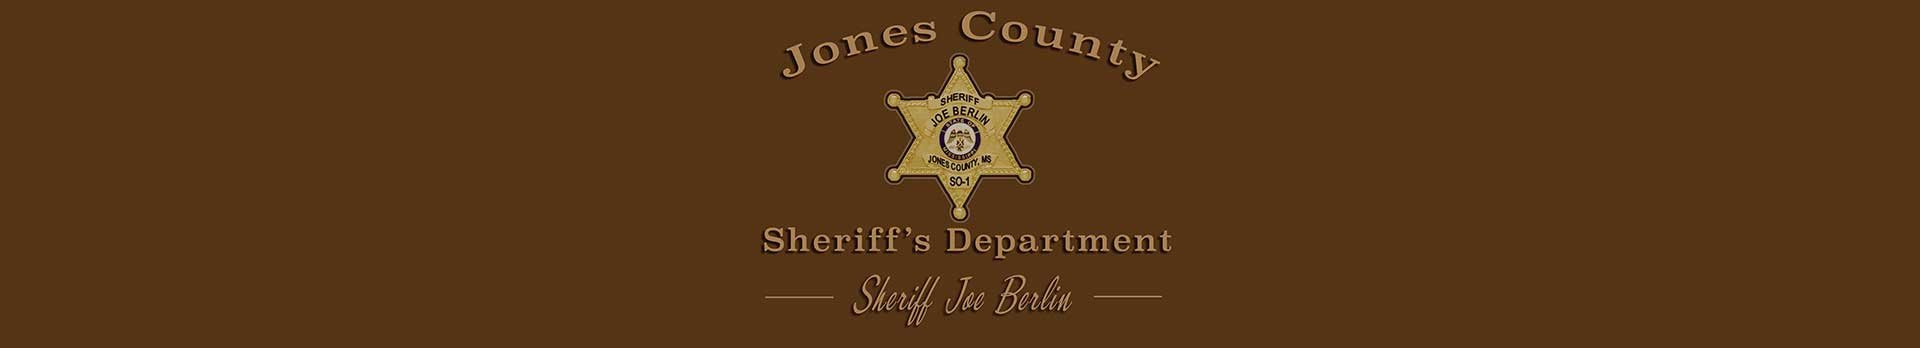 Text displaying Jones County Sheriff's Department and the sheriff, Joe Berlin. The sheriff badge is also featured.